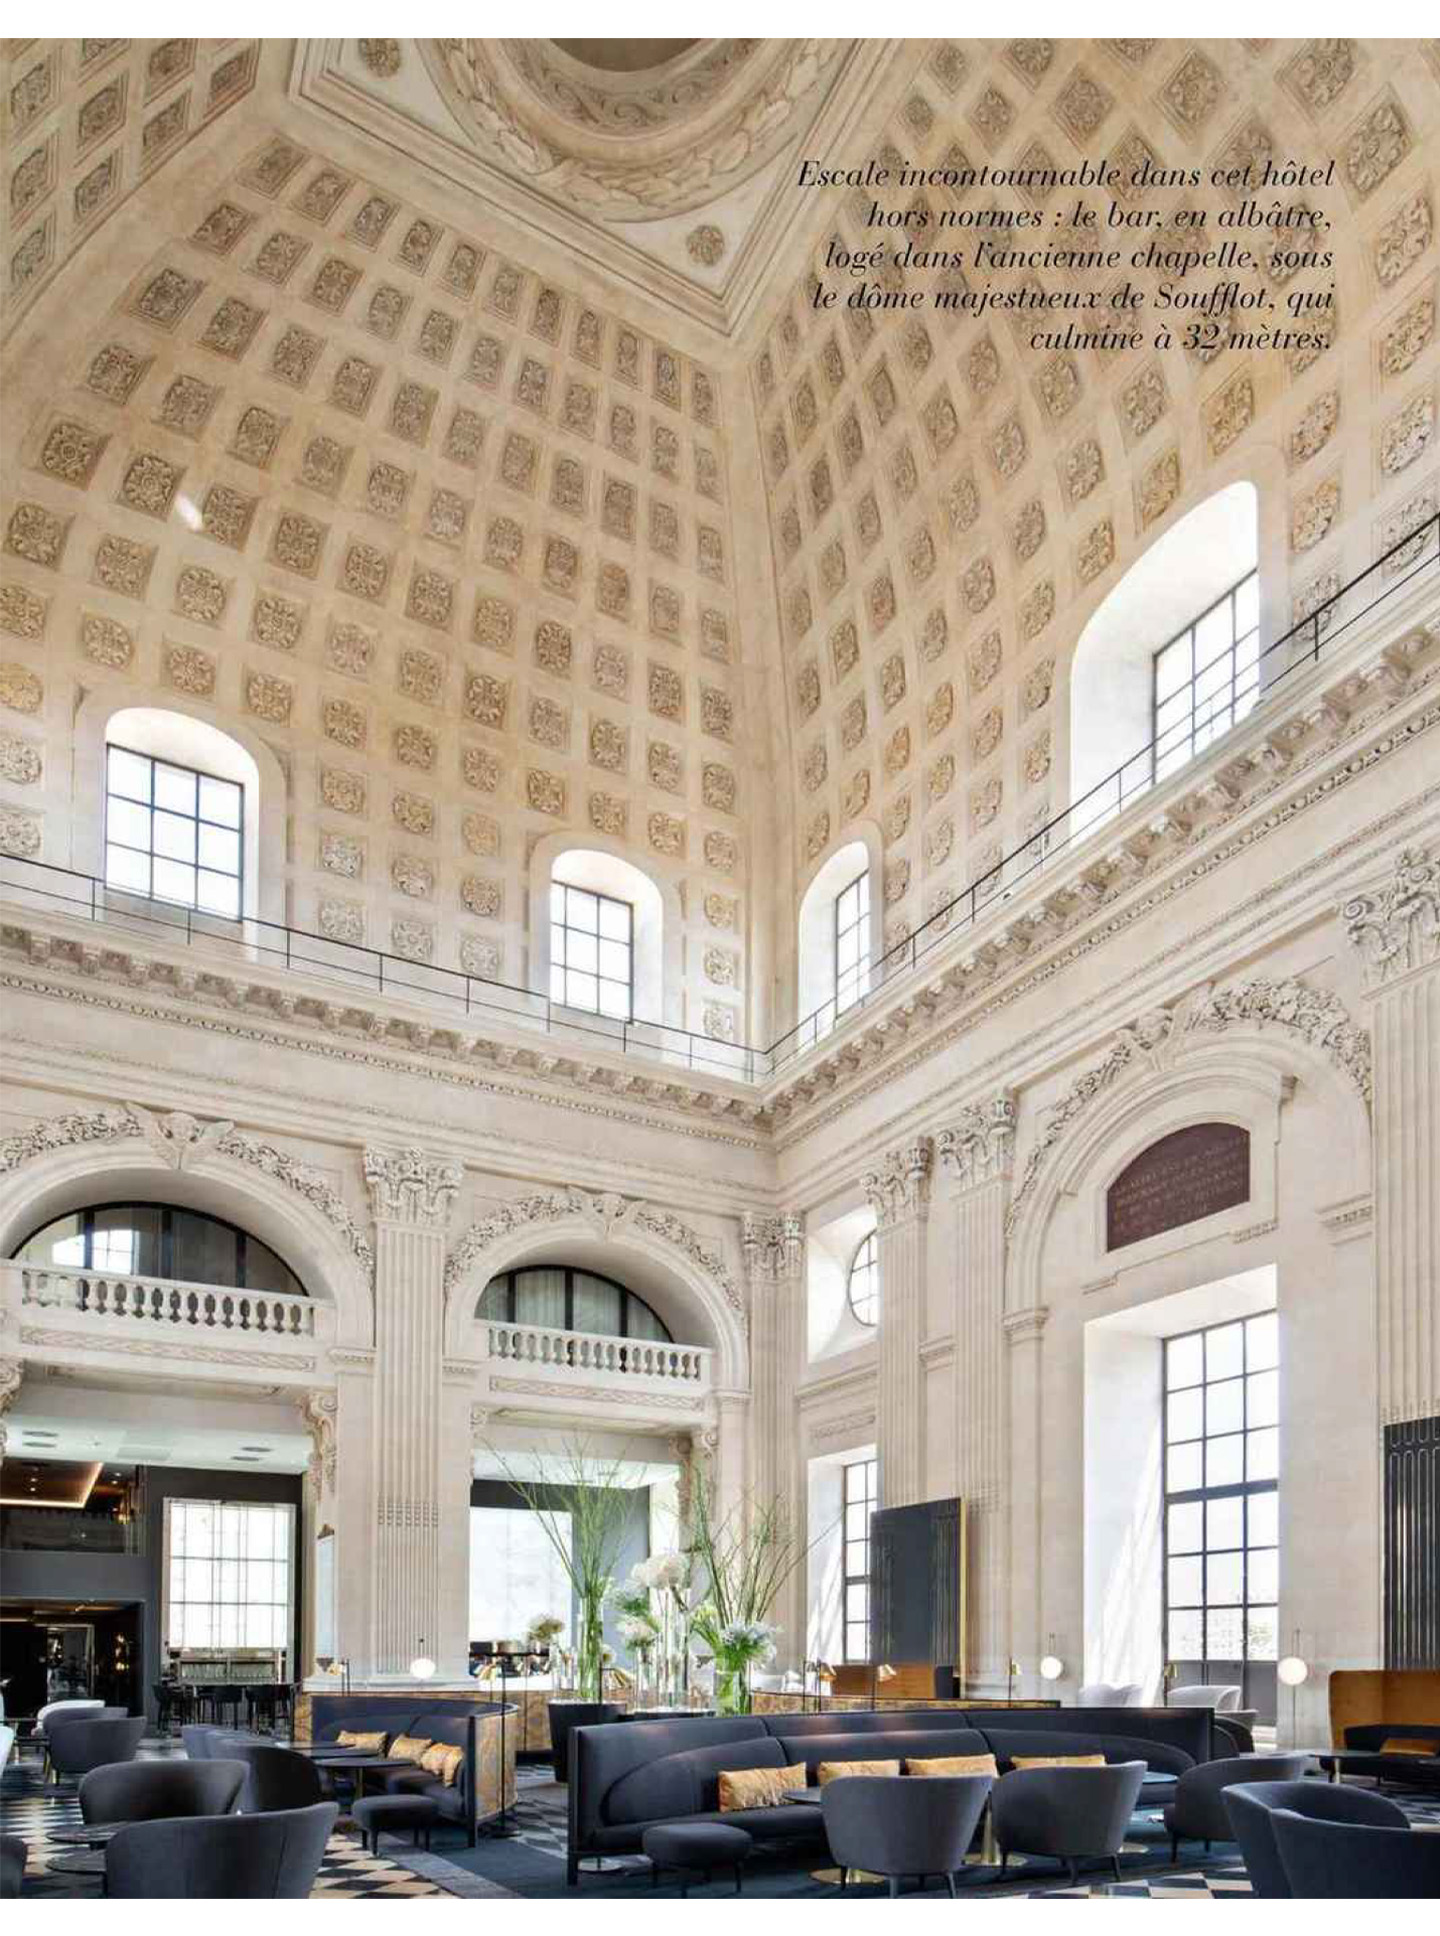 Article on the InterContinental Lyon Hotel Dieu realized by the studio jean-Philippe Nuel in the magazine Voyage de luxe, new luxury hotel, luxury interior design, historical heritage